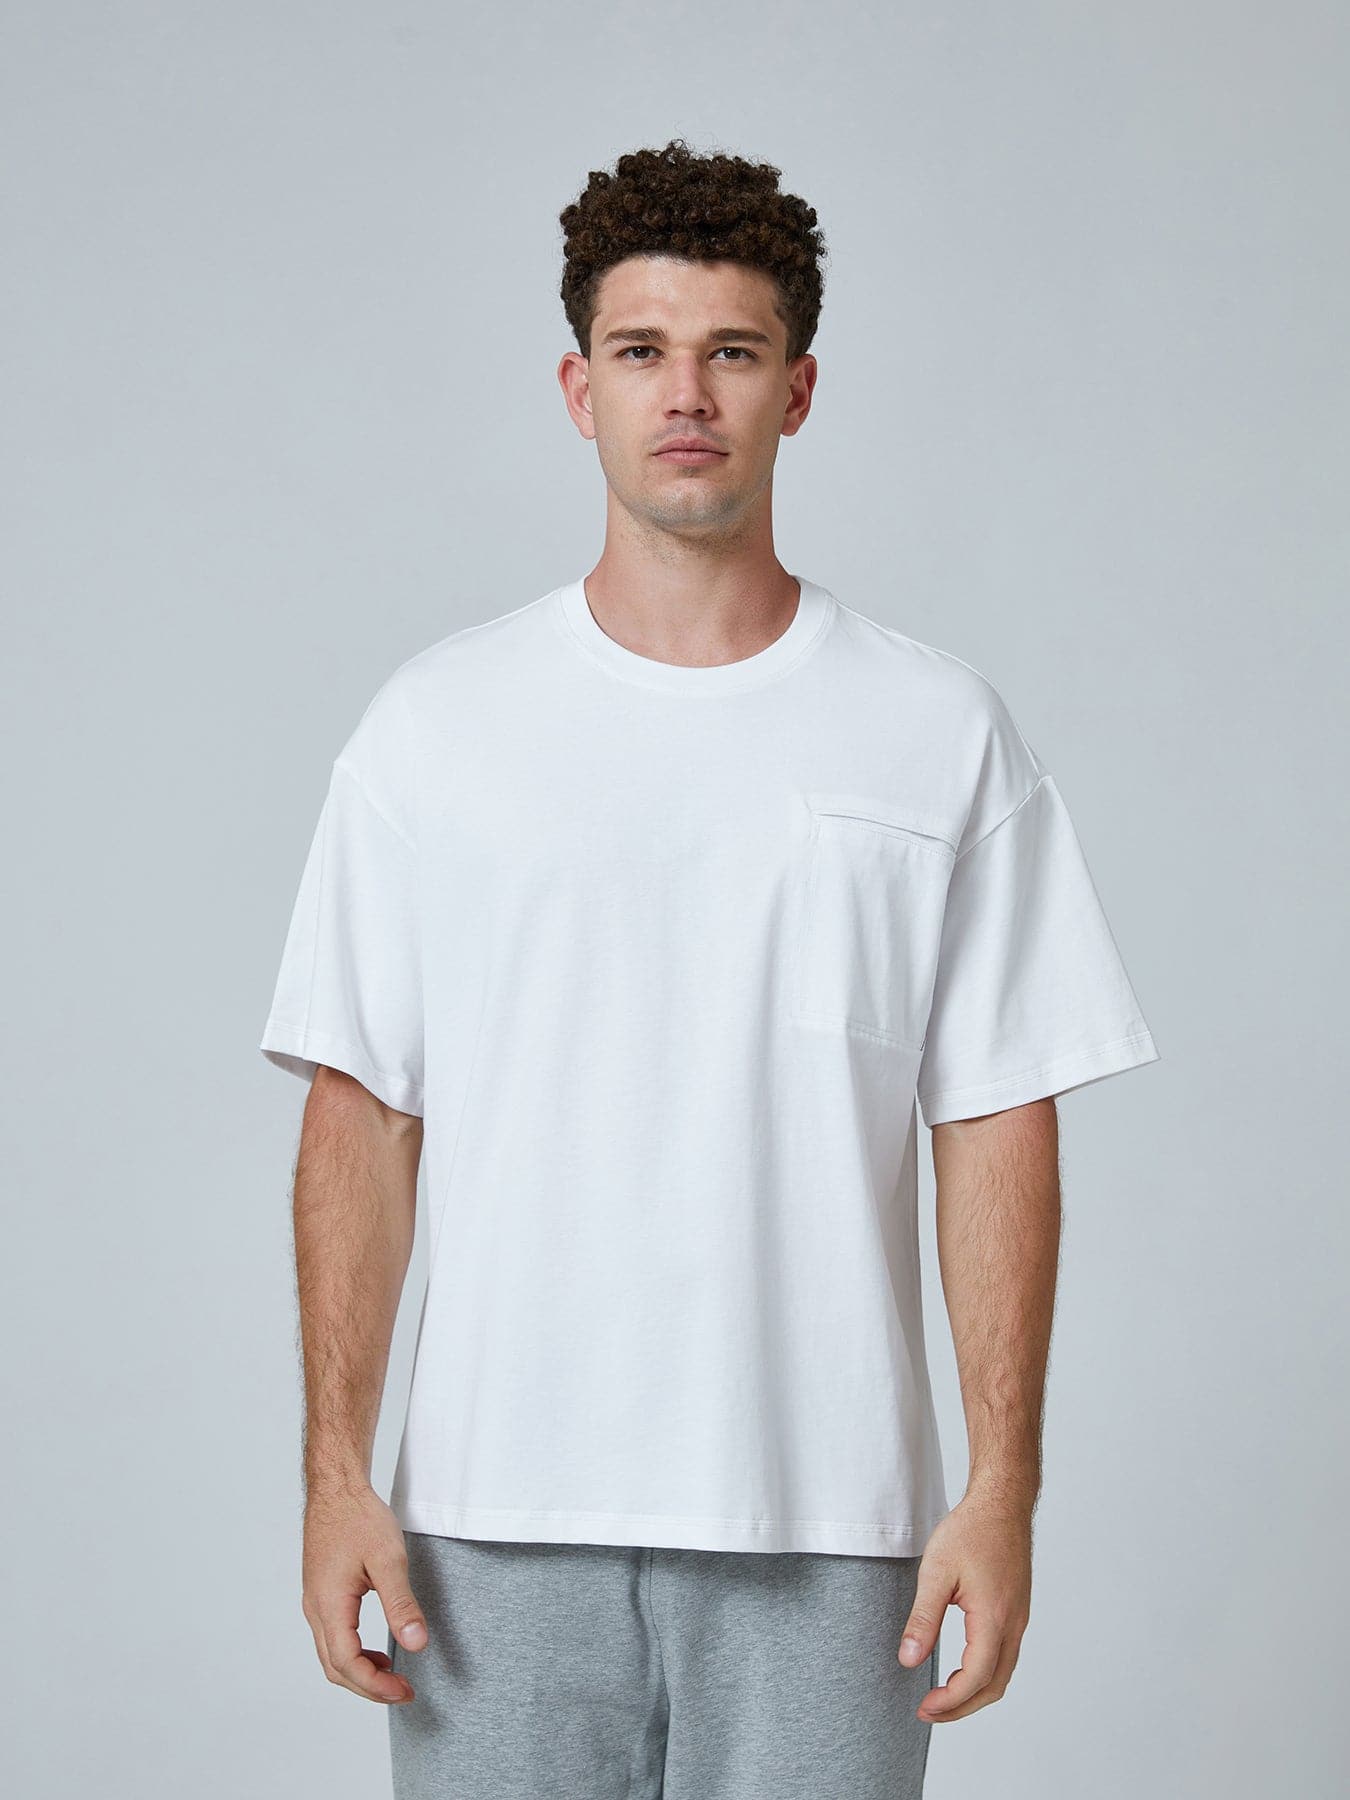 Oversized Tee With Chest Pocket